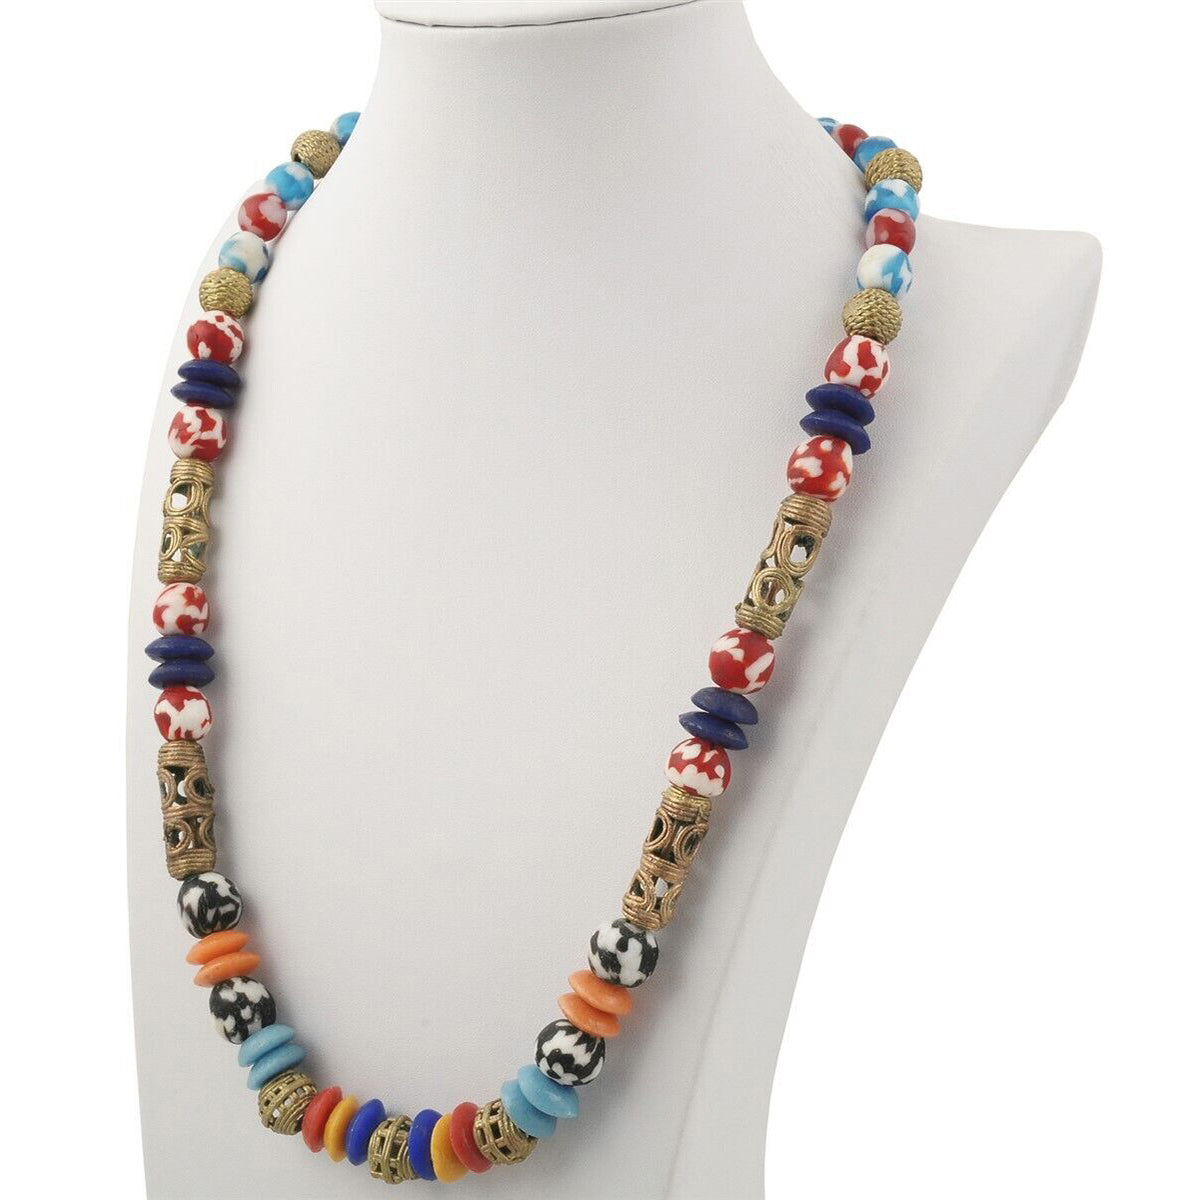 Handmade brass recycled glass beads Ghana African necklace - Tribalgh